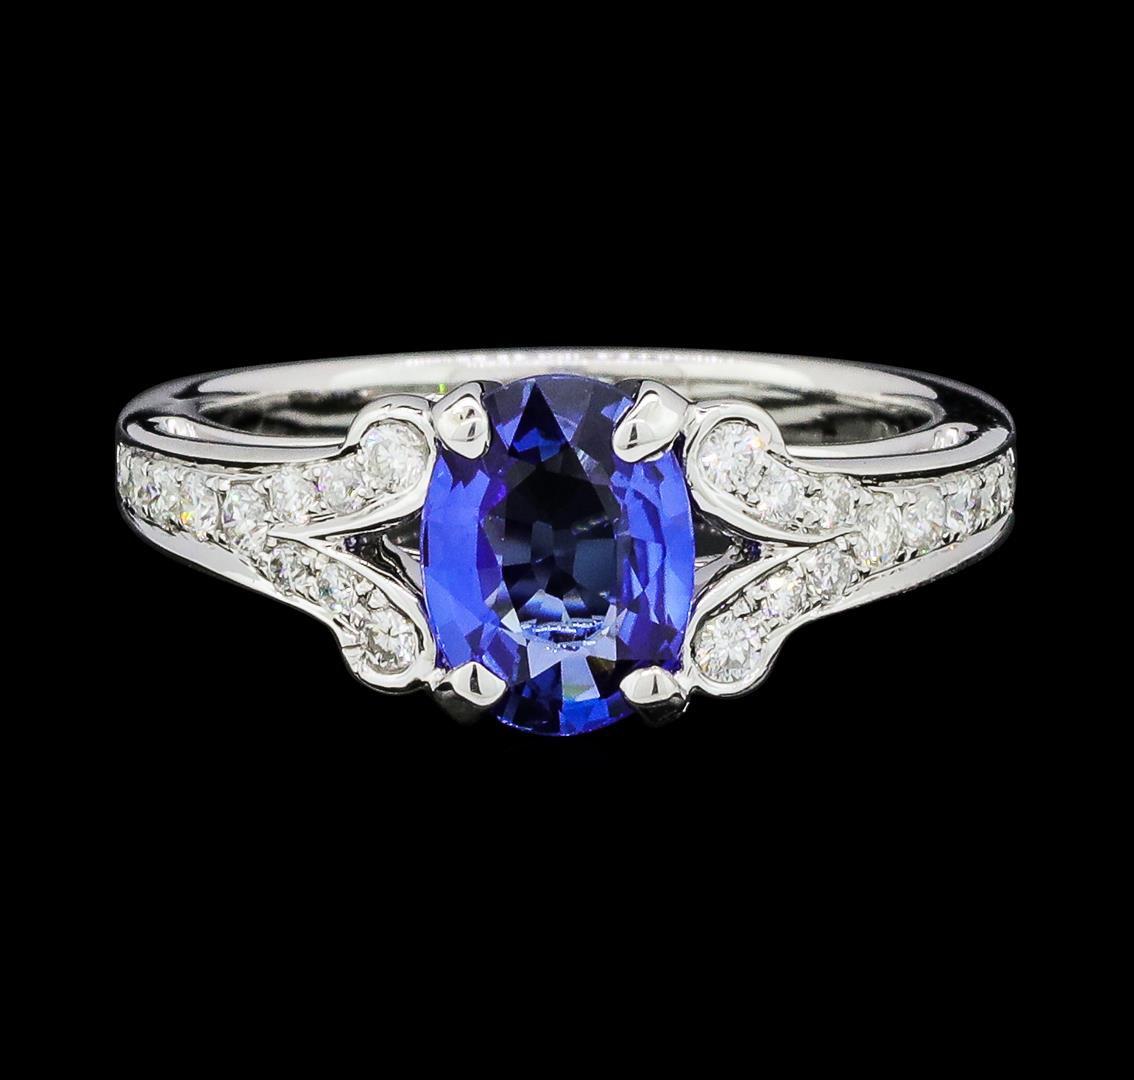 1.32 ctw Sapphire and Diamond Ring - 18KT White Gold